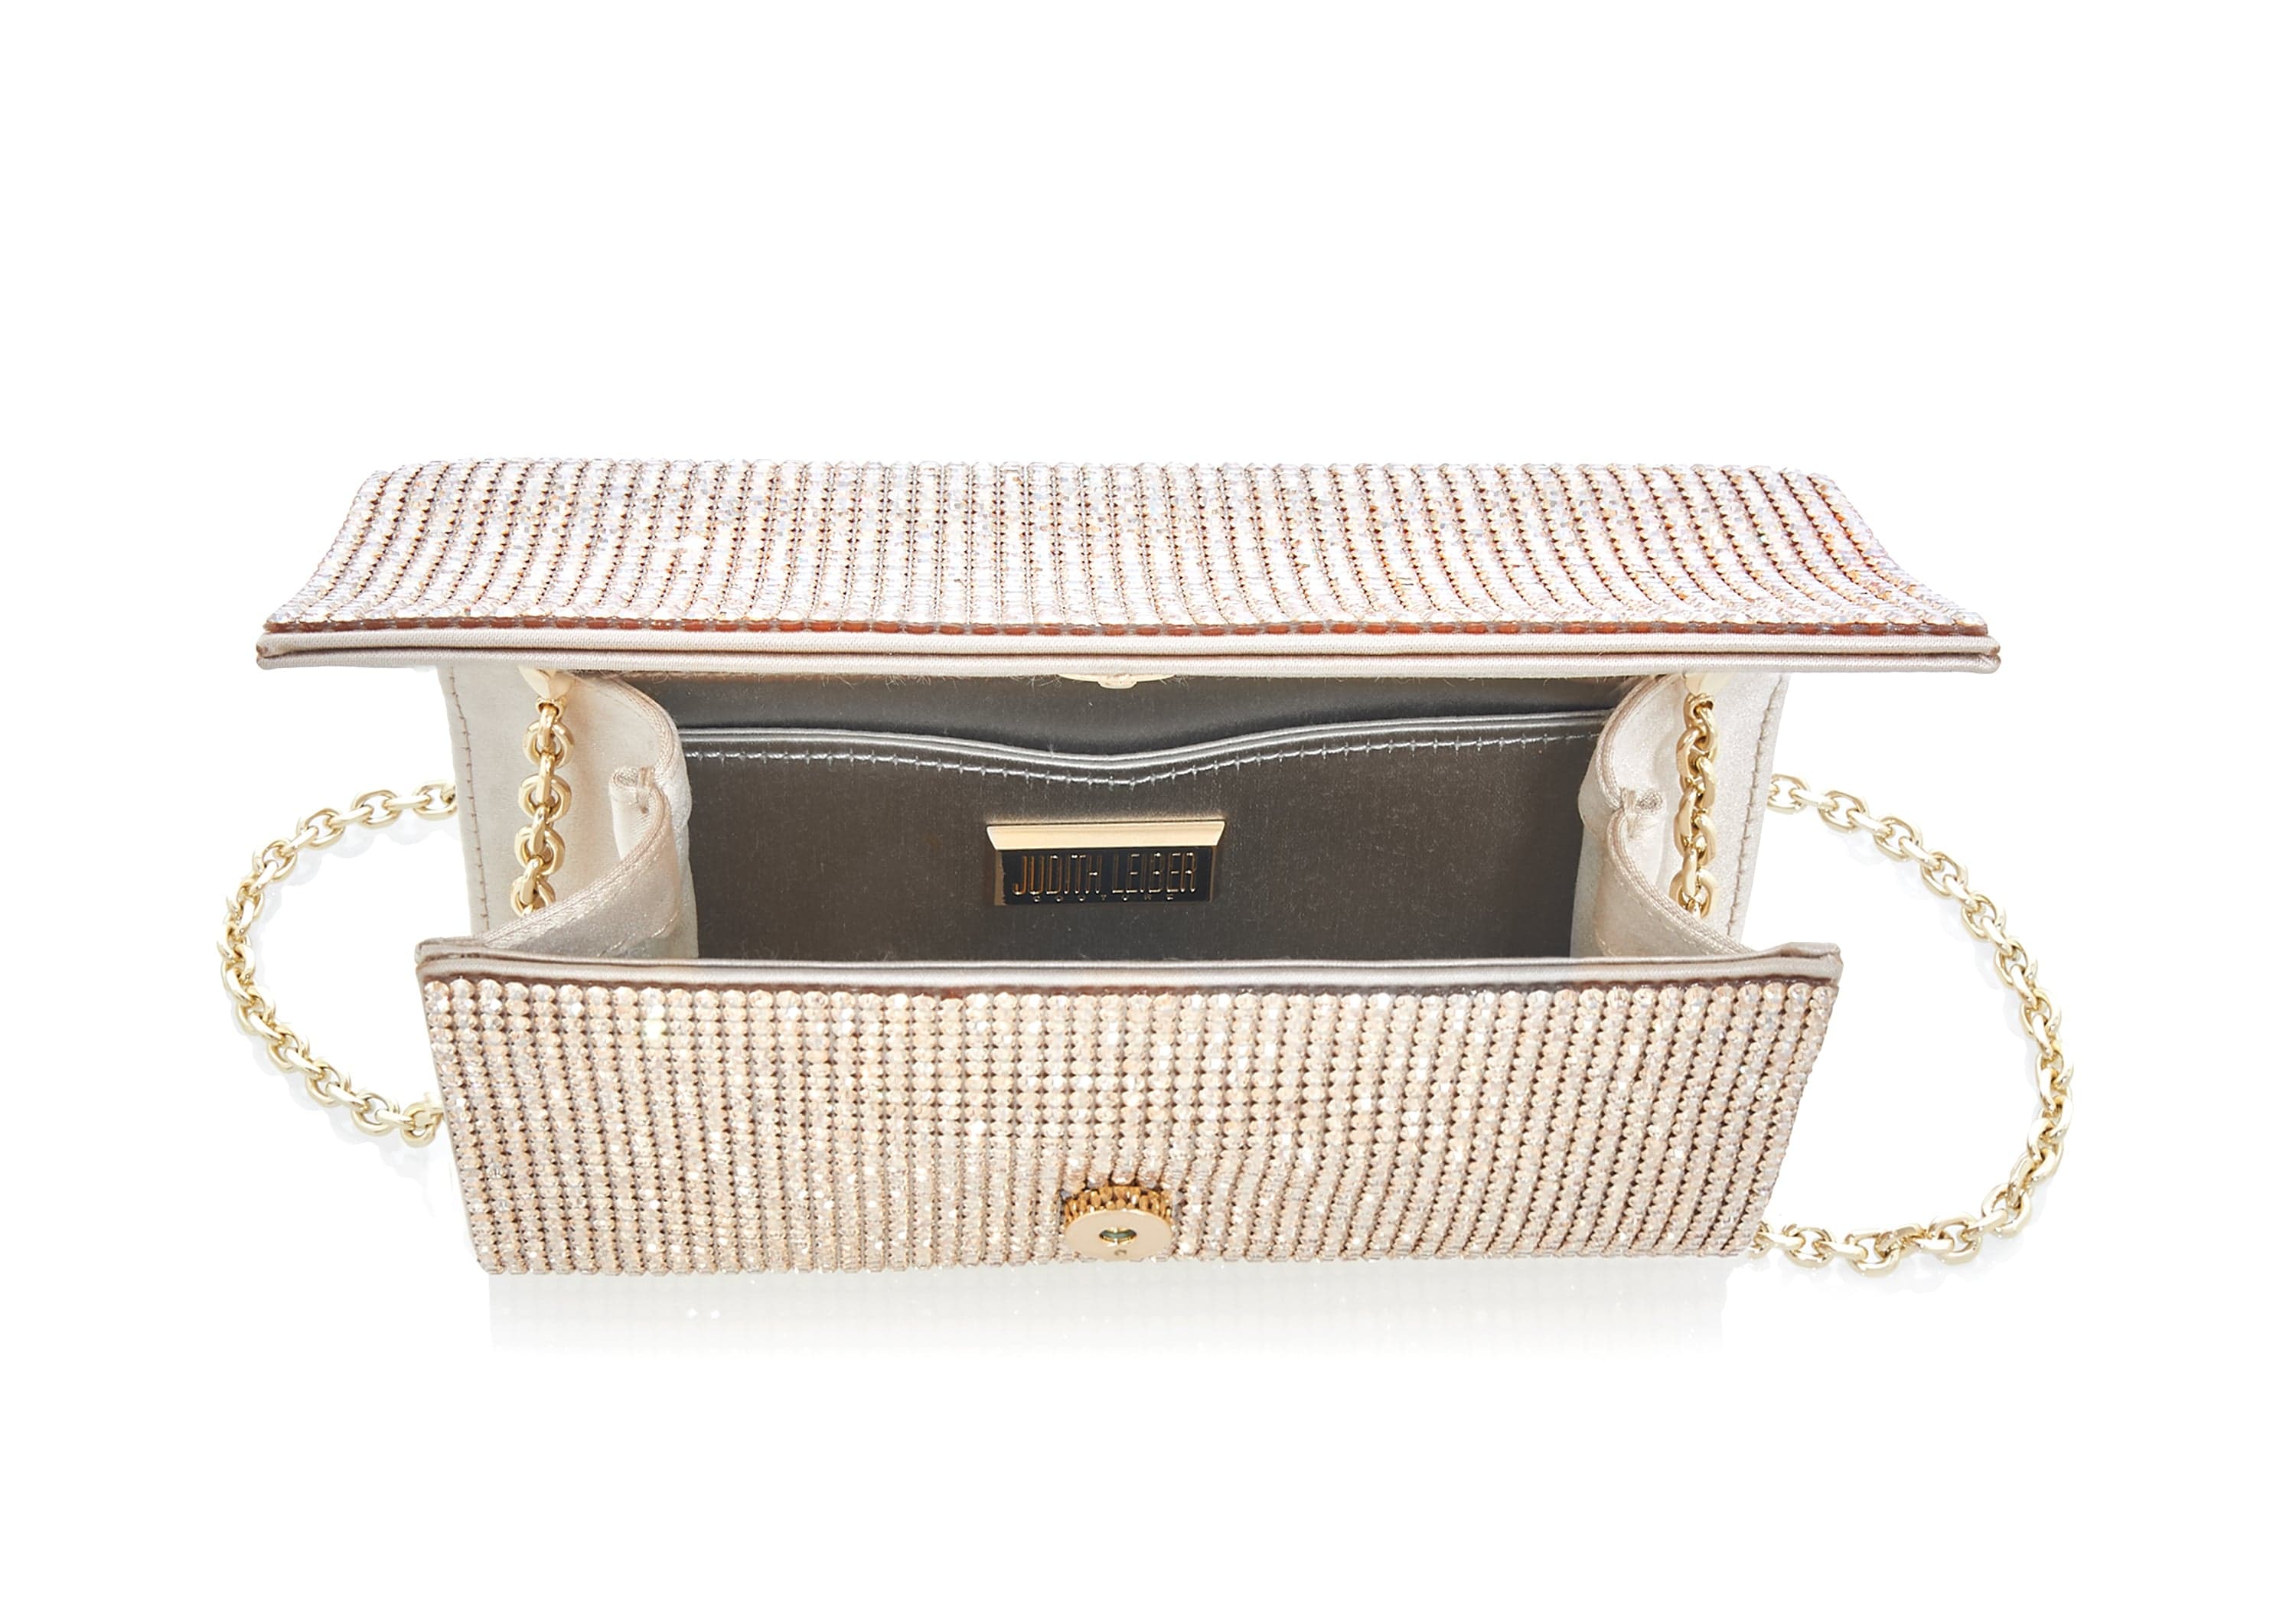 Judith Leiber Couture Women's Charlie Crytal Dog Clutch - Champagne